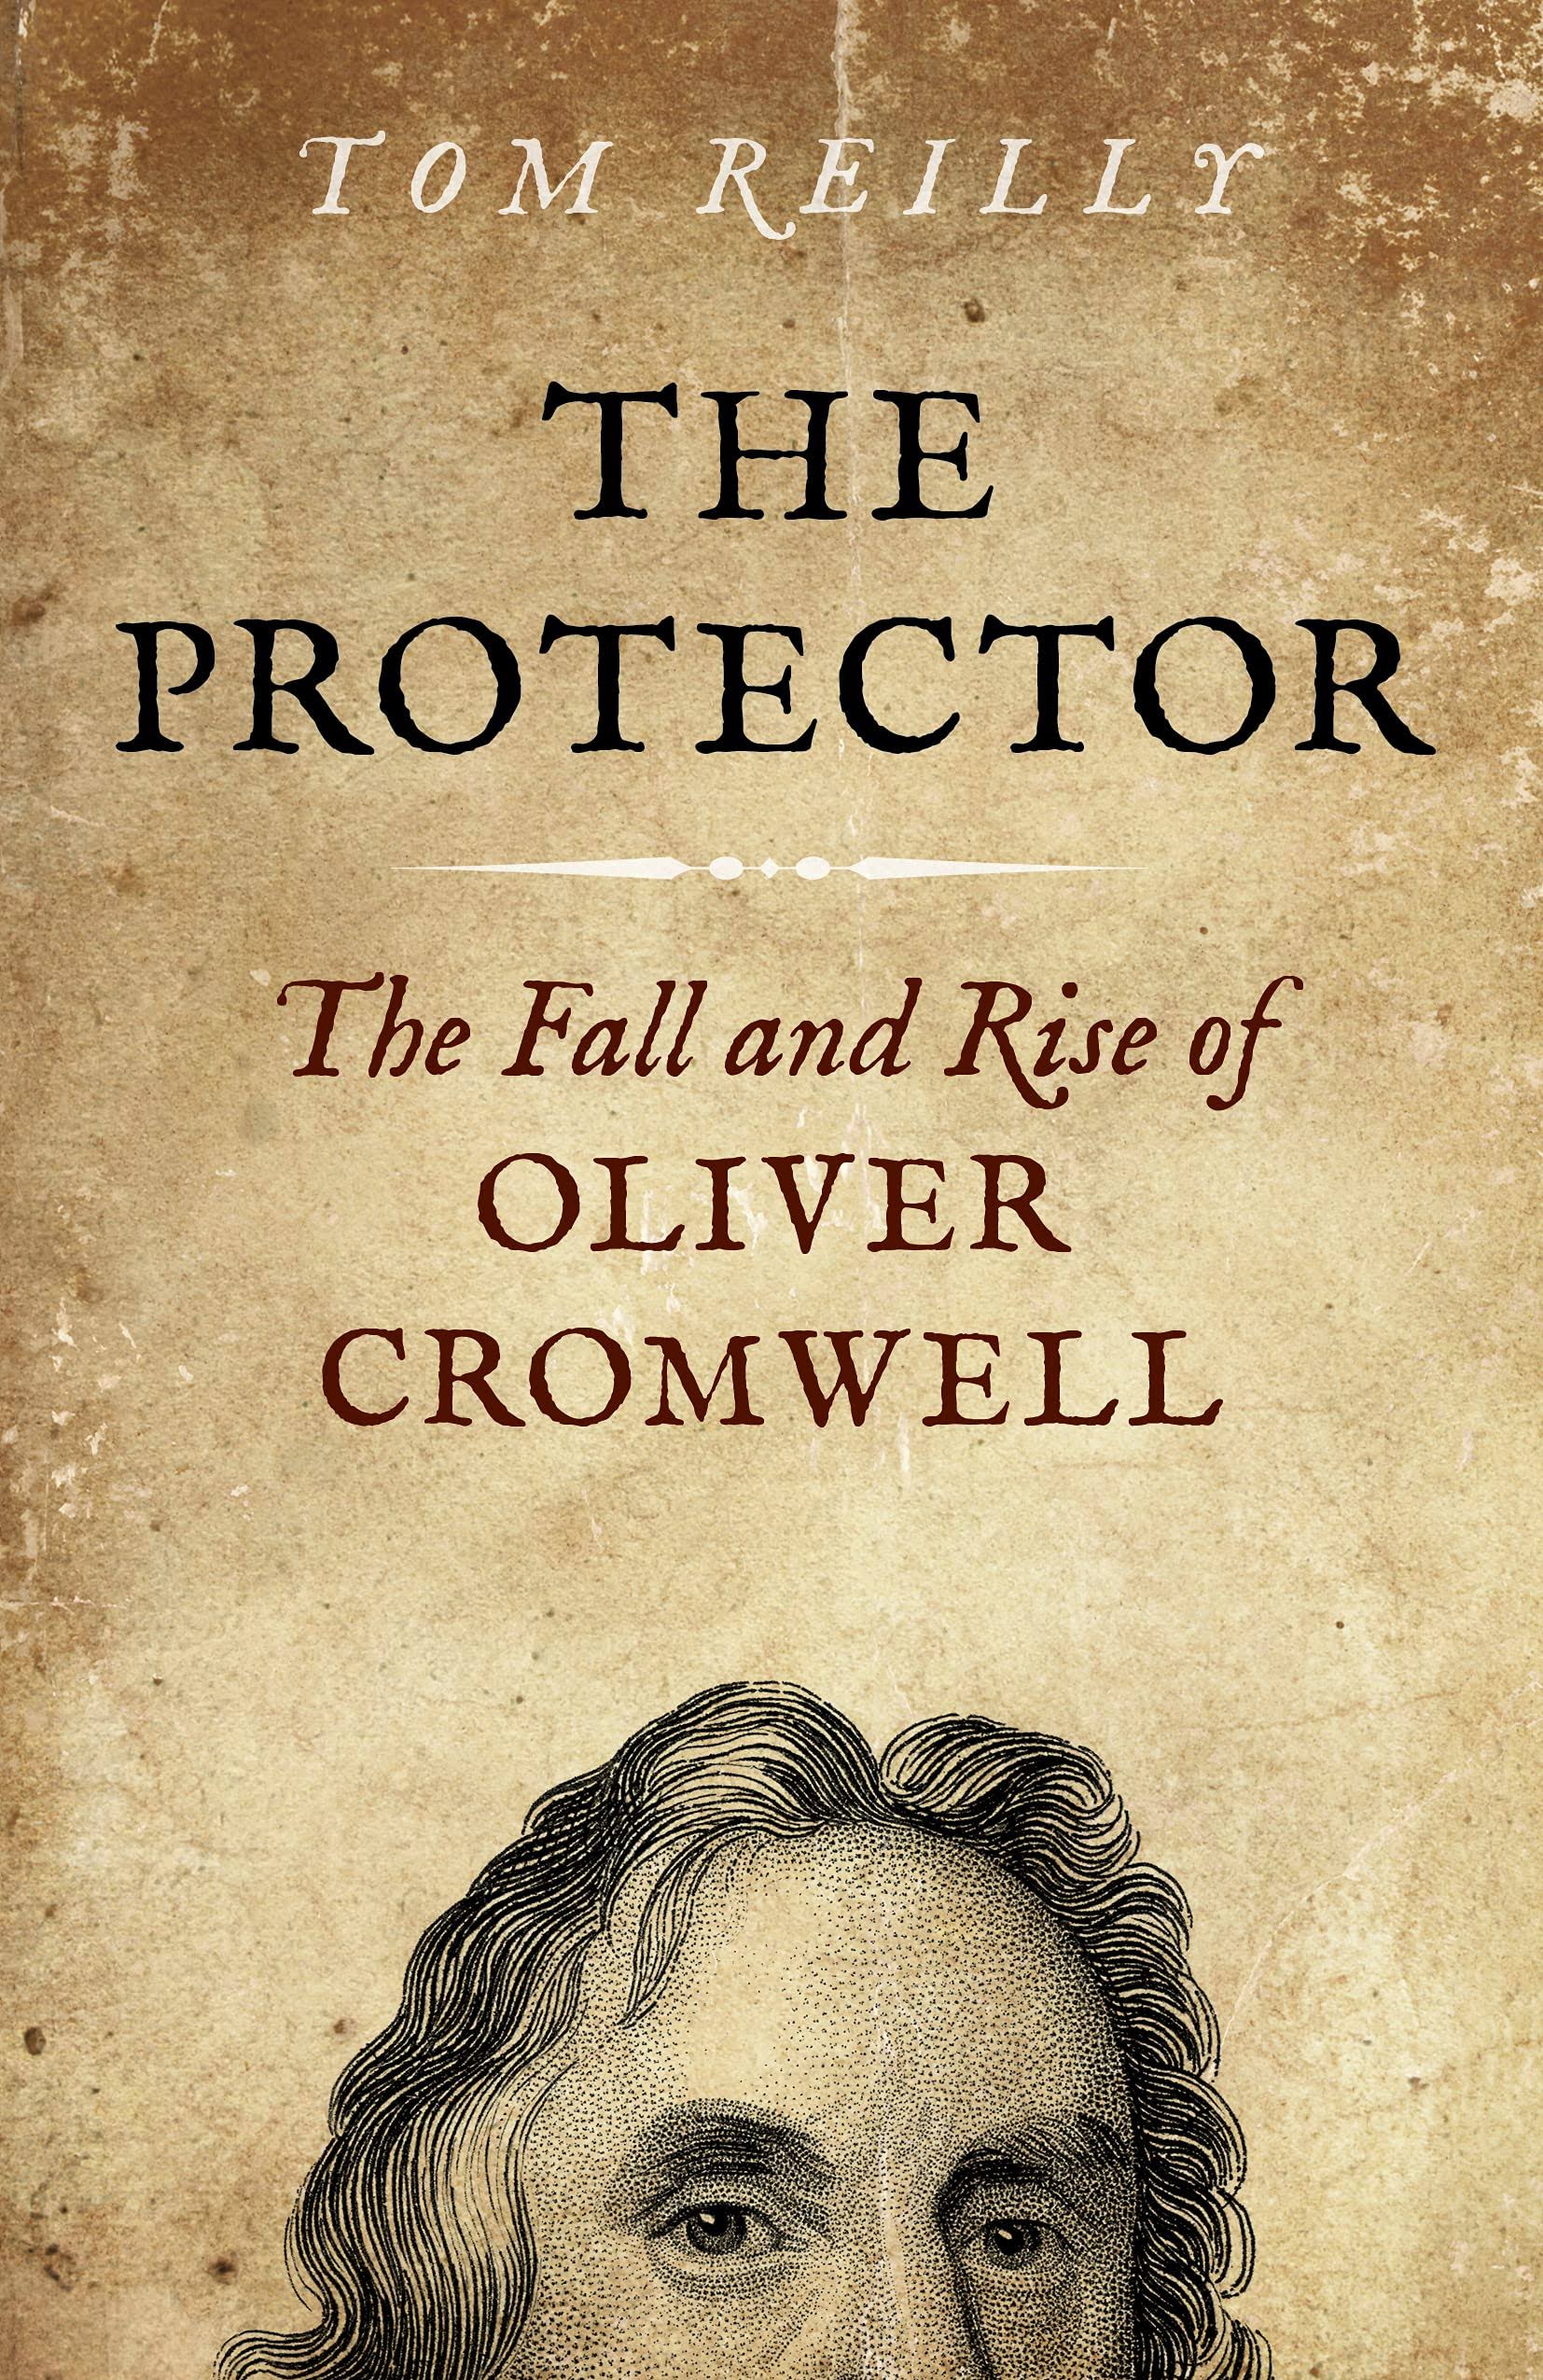 The Protector: The Fall and Rise of Oliver Cromwell [Book]